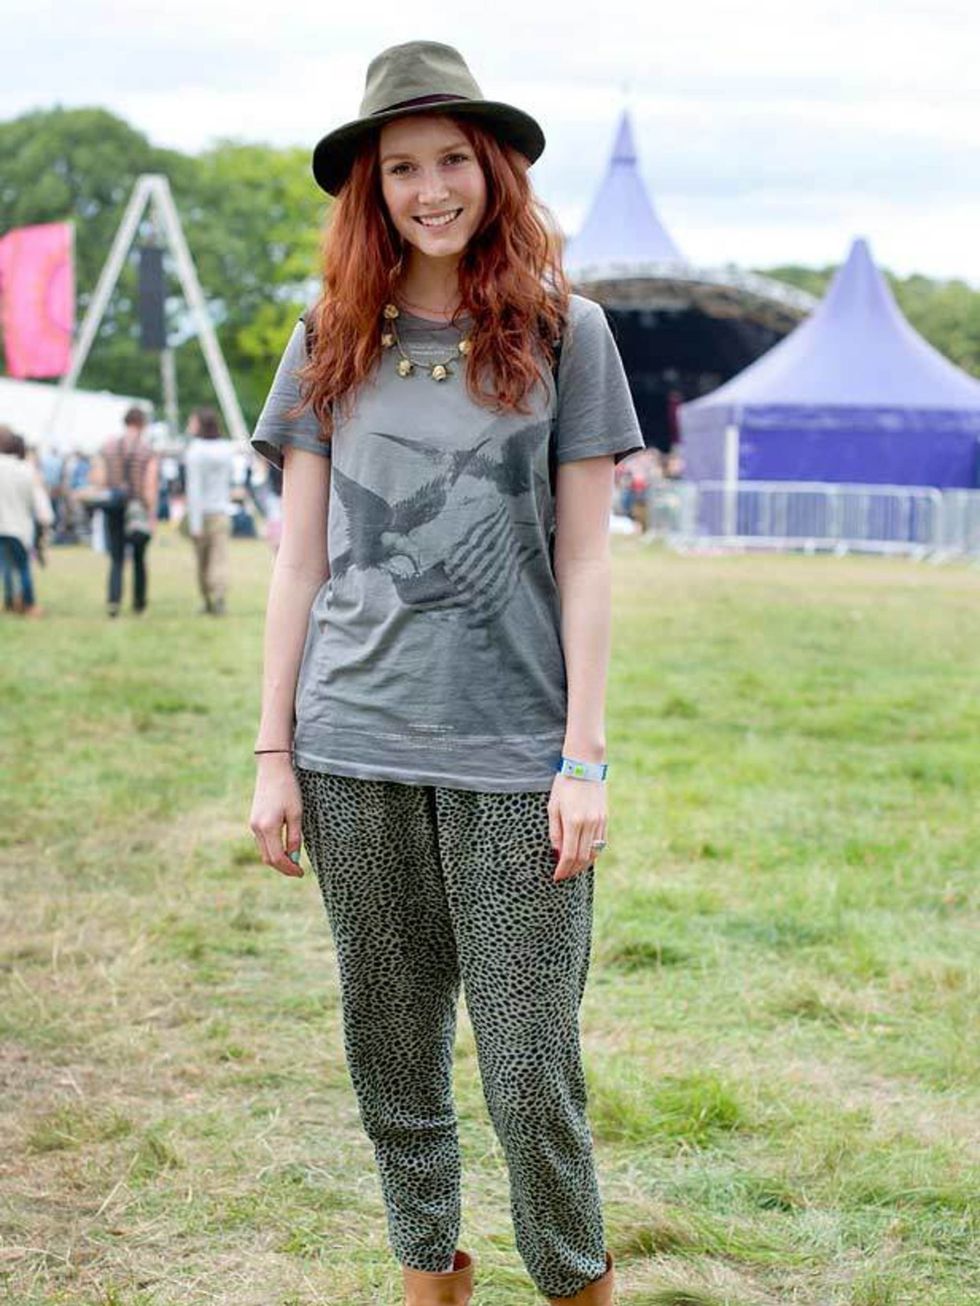 <p>Photo by Kirstin SinclairAlex Glenday, 22, Model. All Saints t-shirt, Whistles trousers, vintage hat, Russell and Bromley boots.</p>